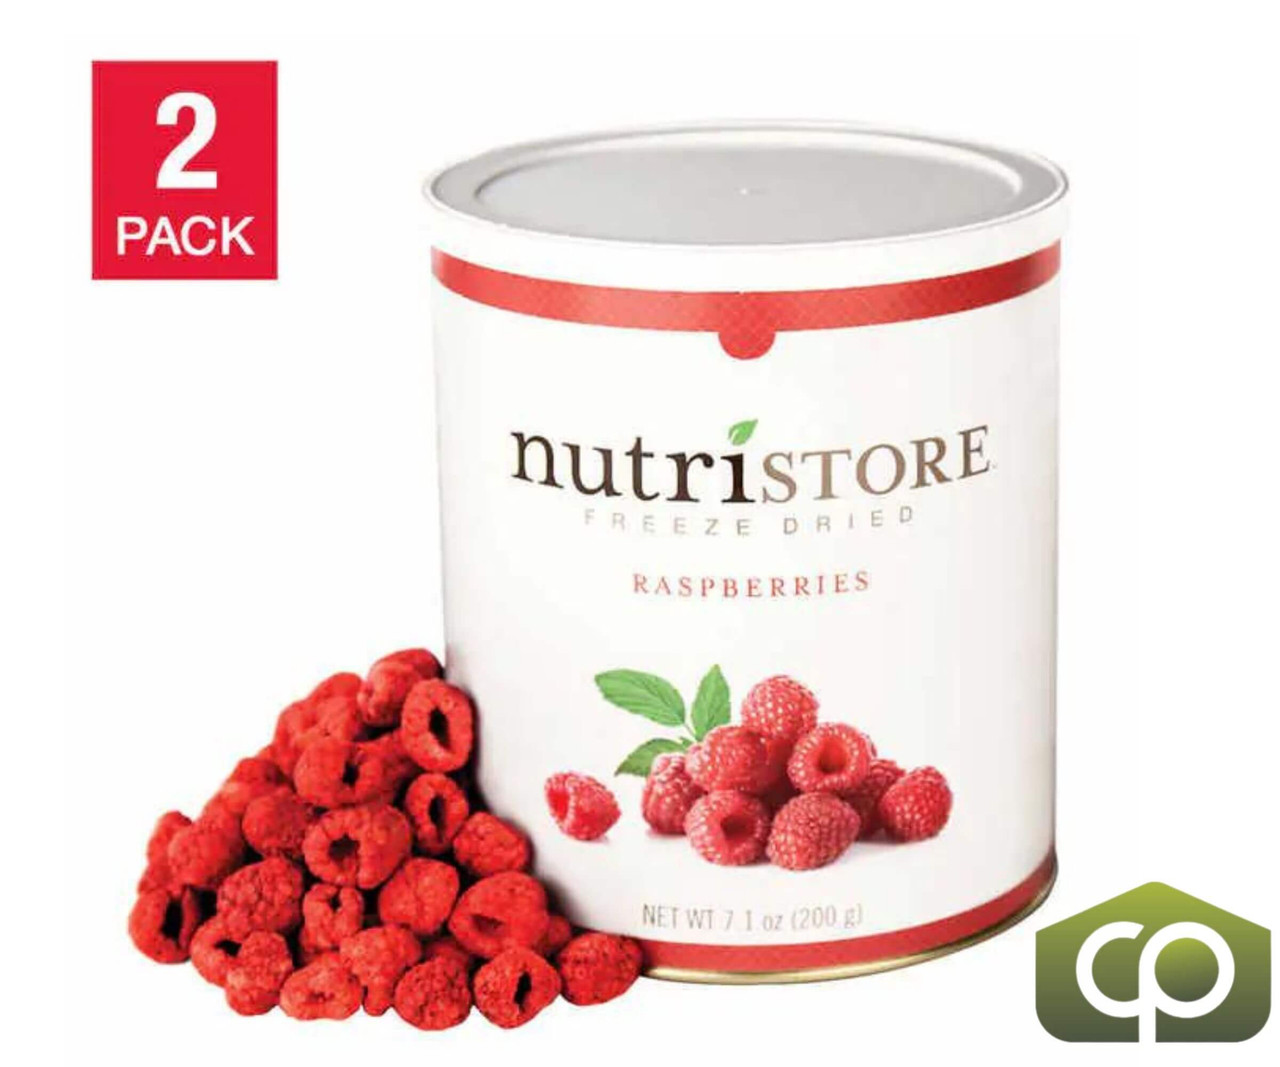 Nutristore Freeze-Dried Raspberries 2-Pack - 200g (7 oz.) - Pure Flavor - Chicken Pieces